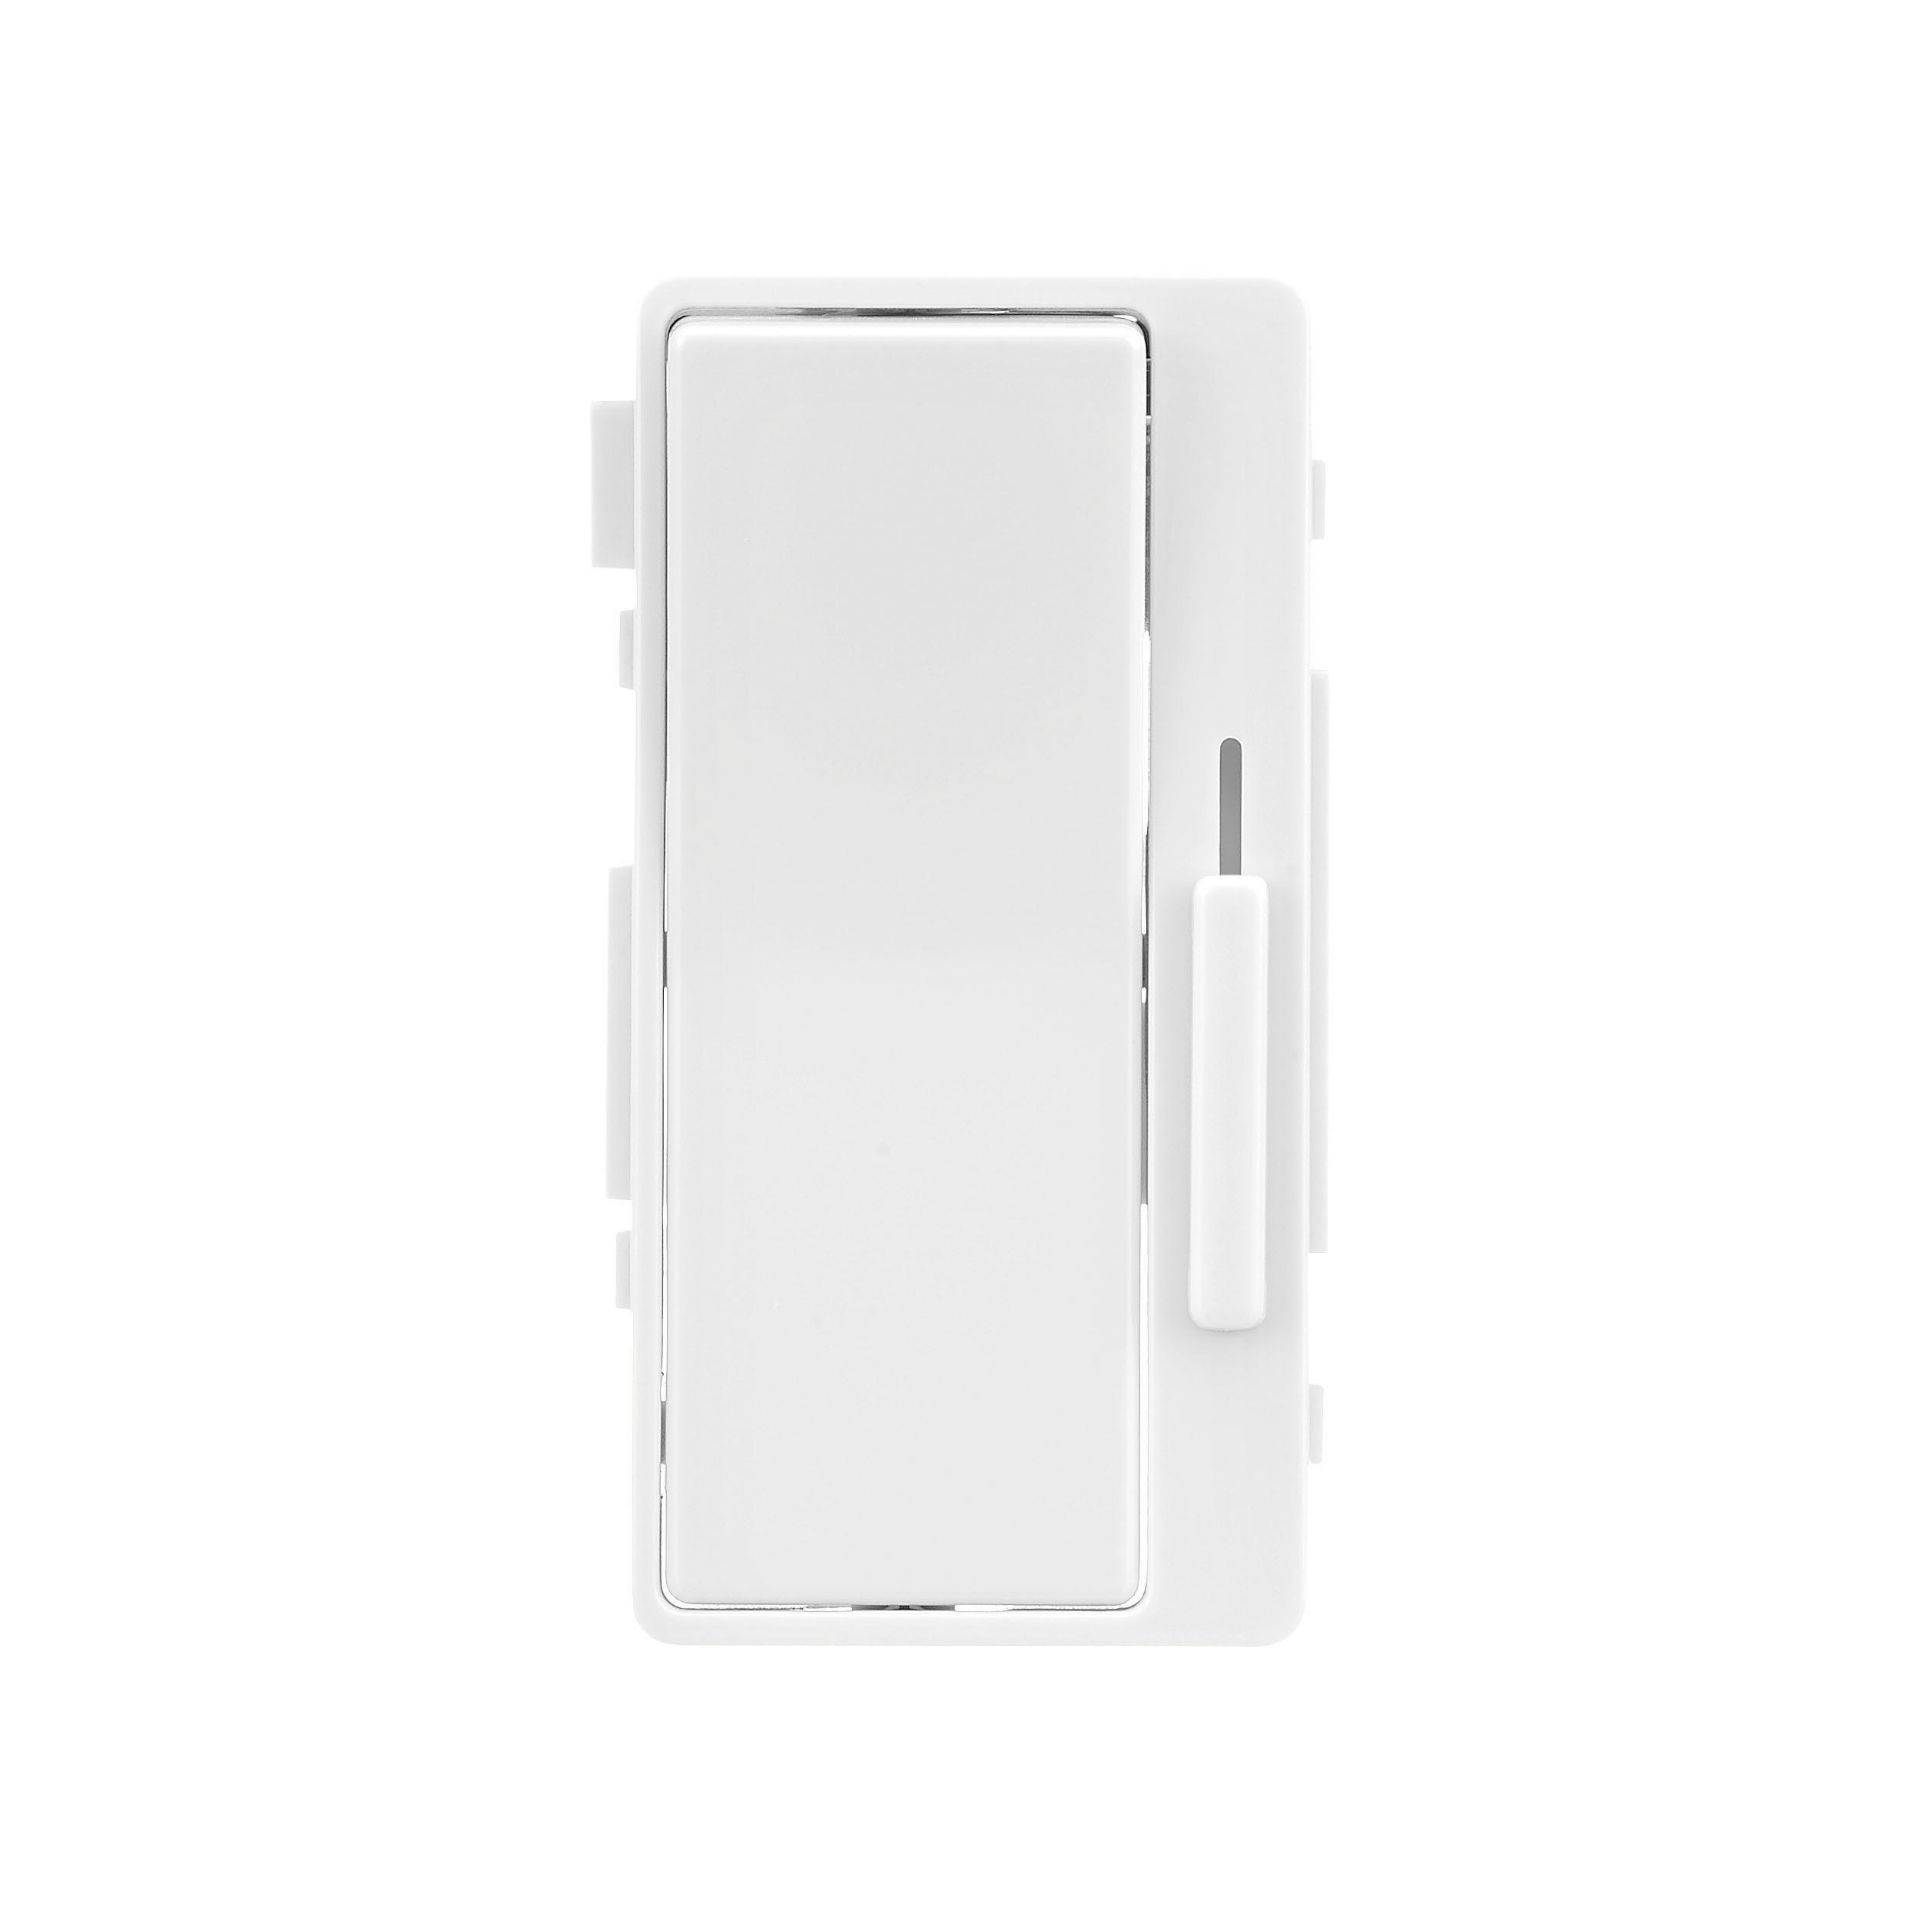 90x Eaton DCK1-A Light and Dimmer Switches EA